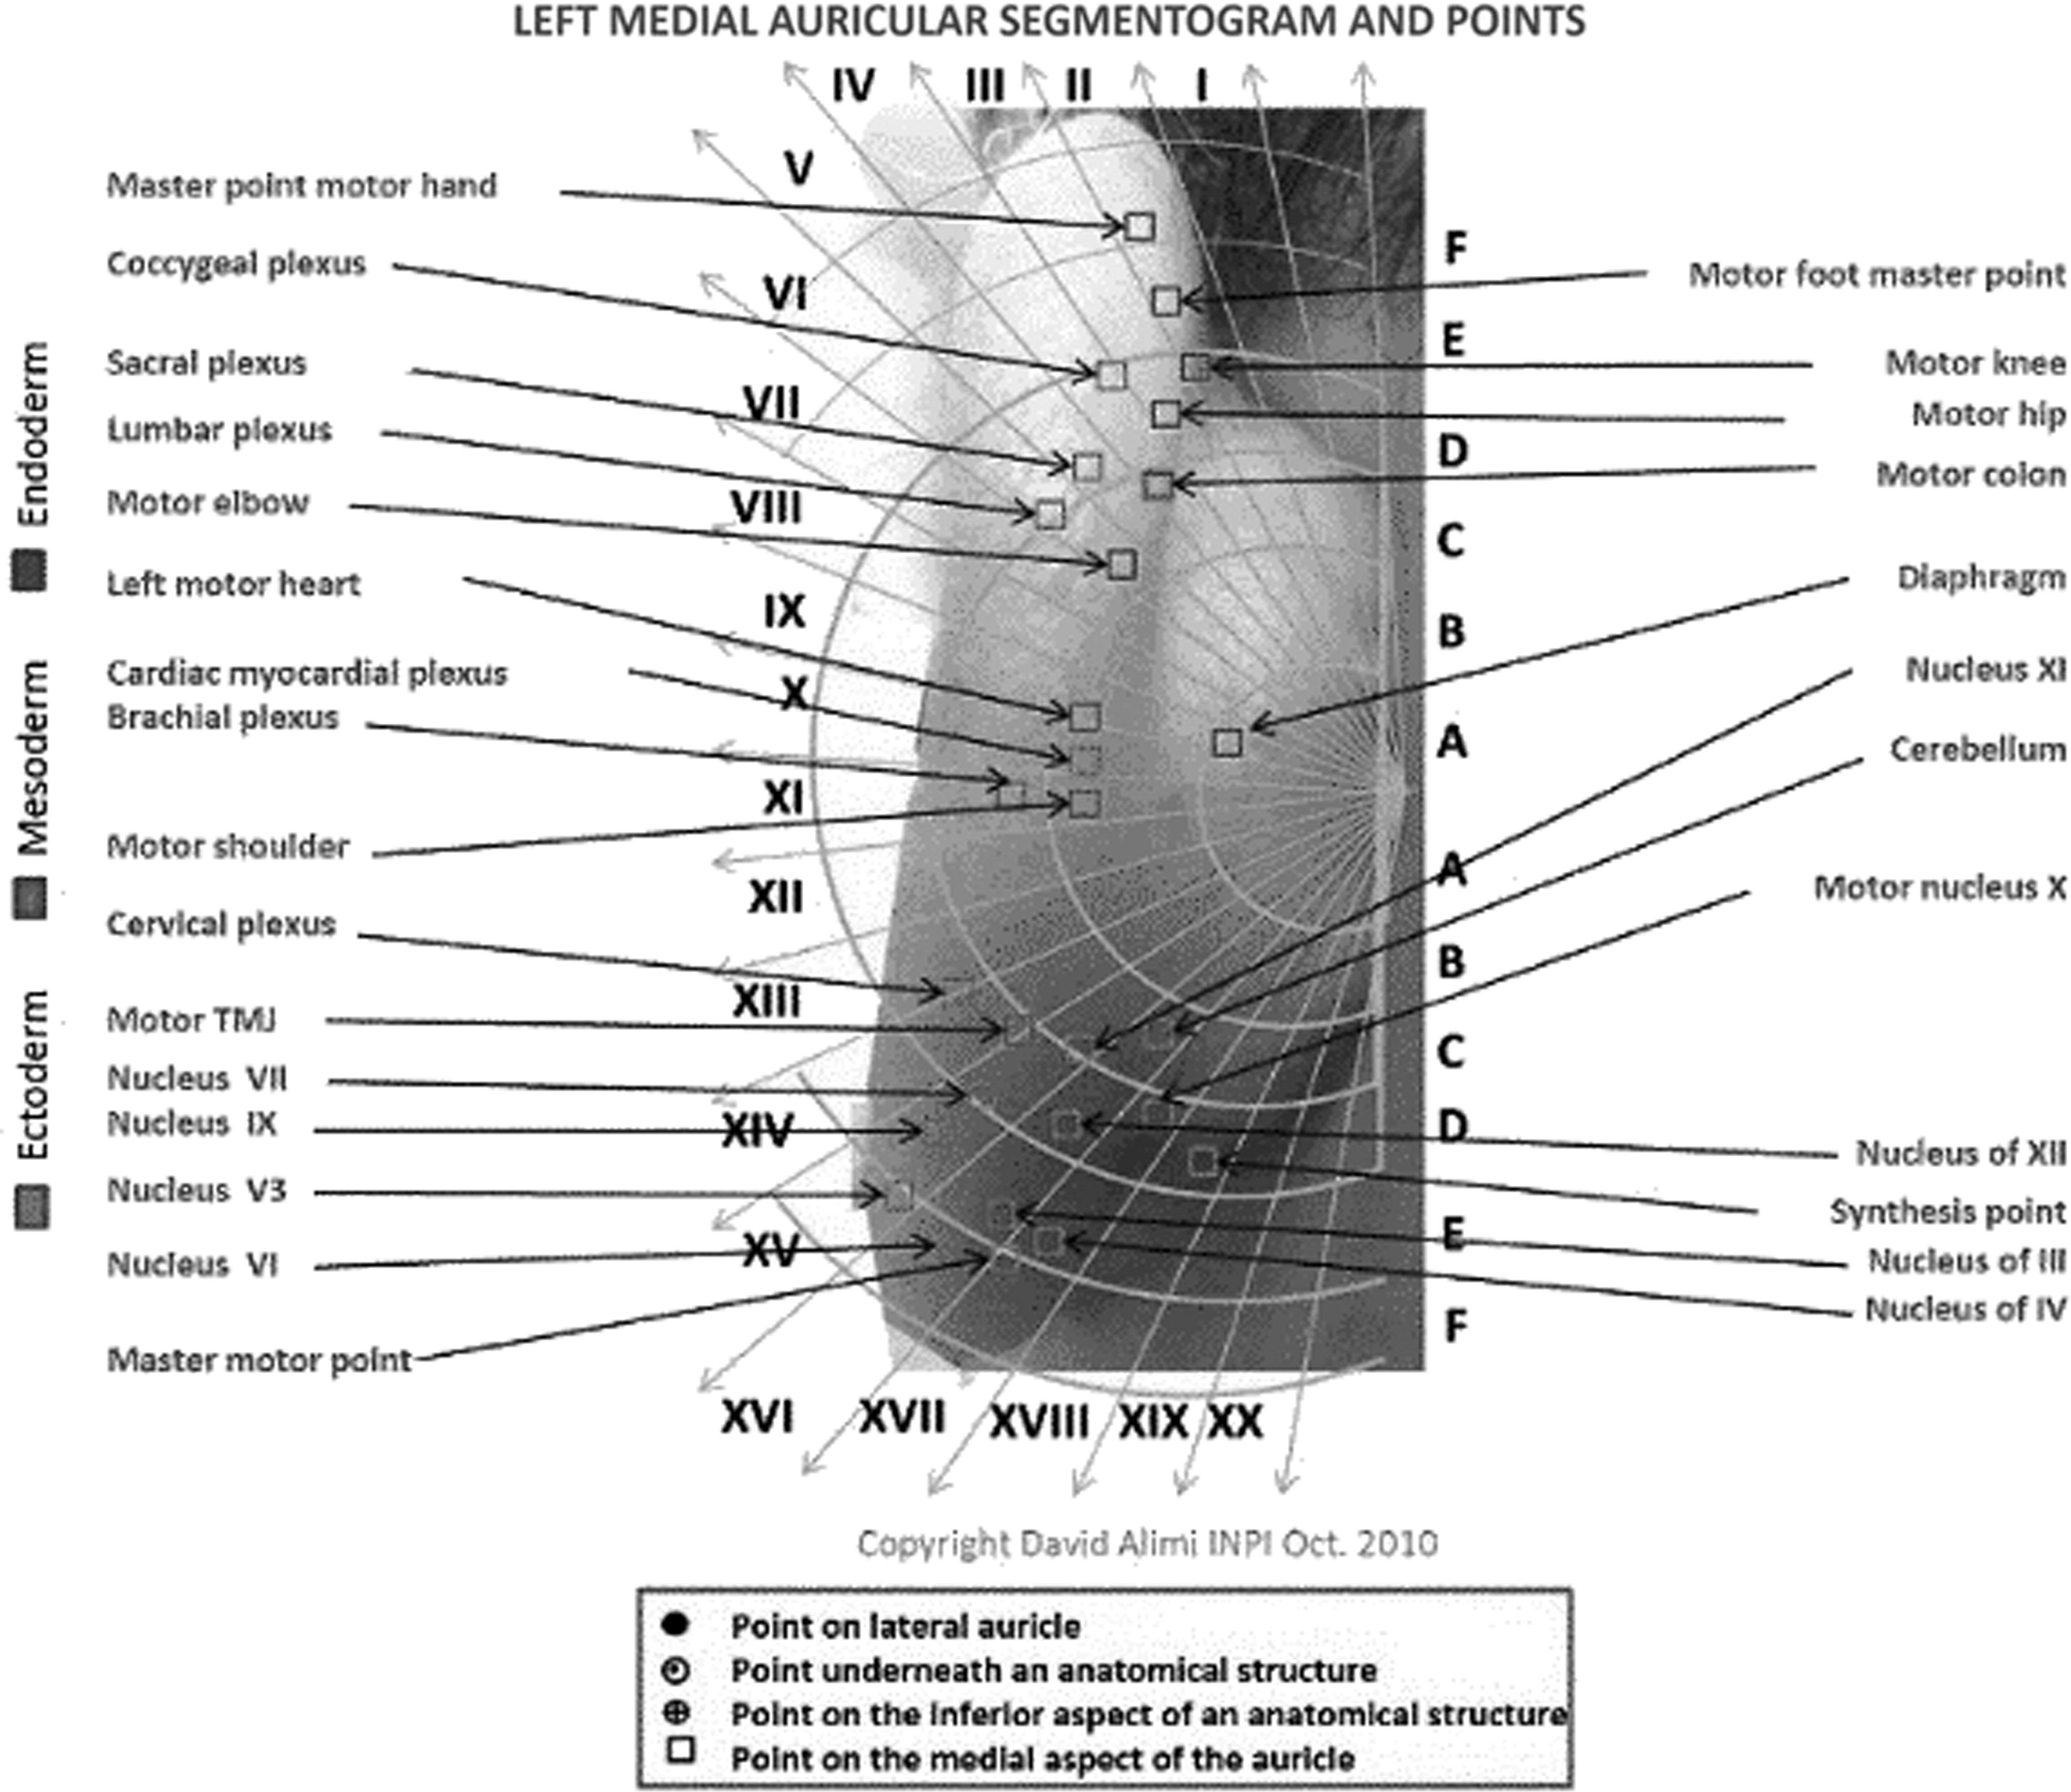 A new nomenclature for auricular acupuncture: The ultimate in Tooth Fairy s...